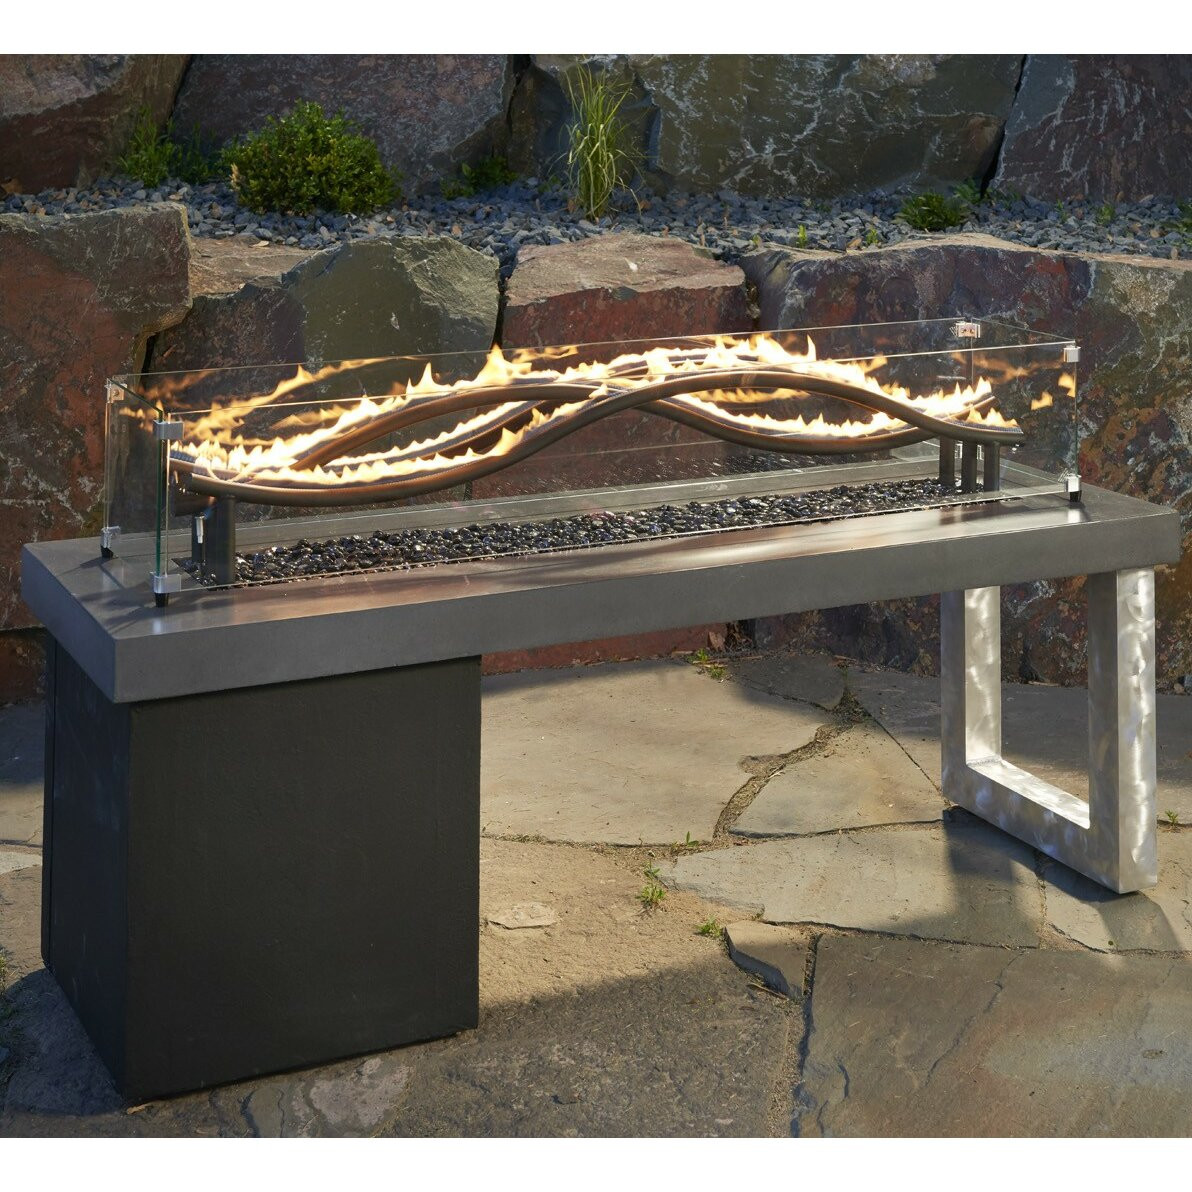 Patio Fire Pit Propane
 The Outdoor GreatRoom pany Wave Propane Fire Pit